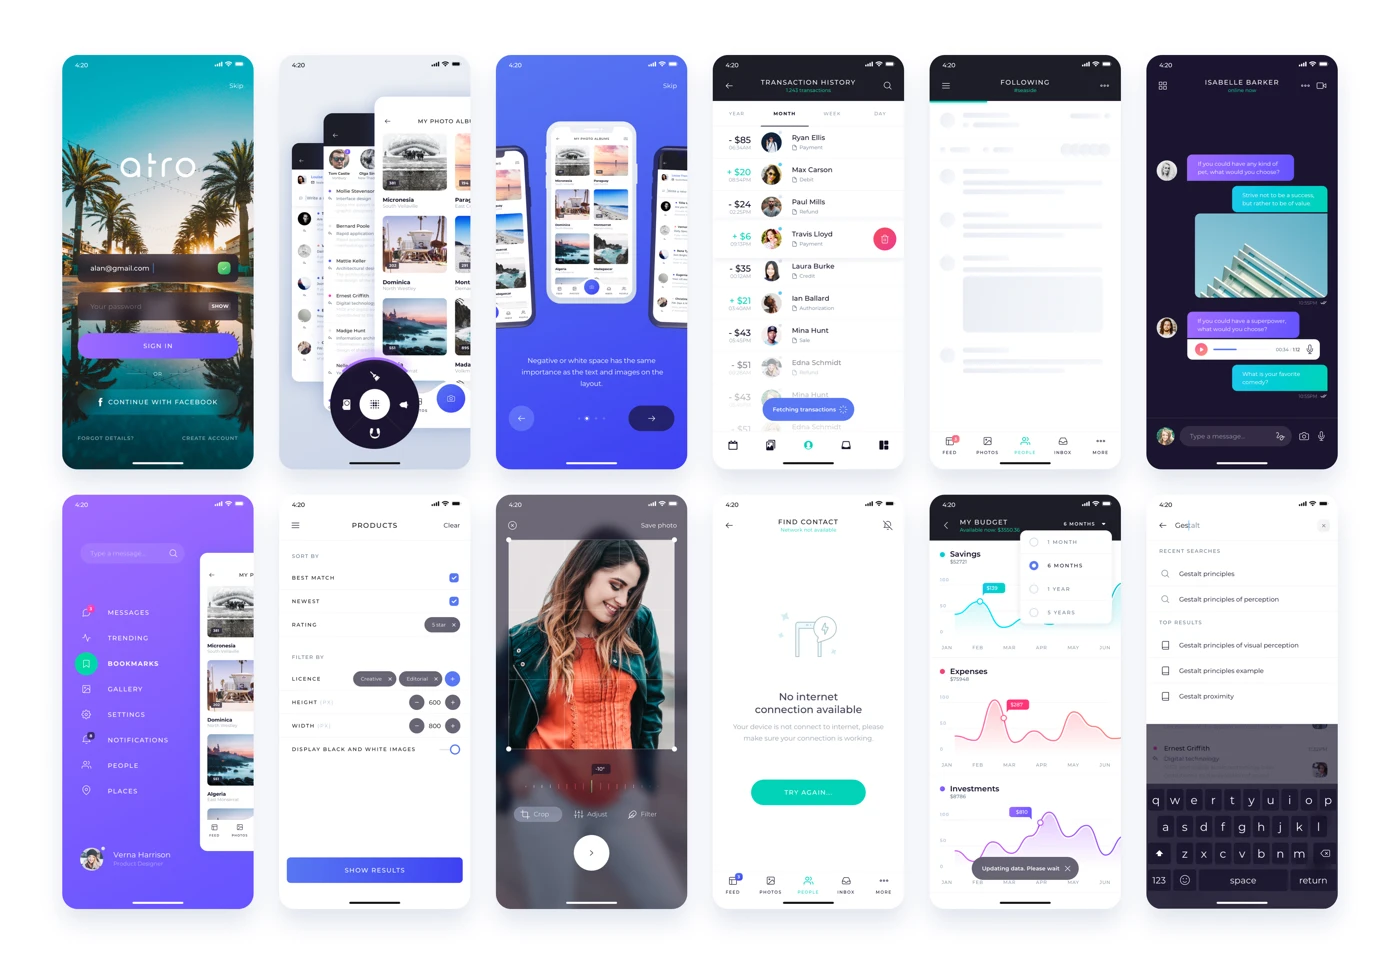 Atro Mobile UI Kit Freebie - Whatever you need a nudge to start work on your idea, find inspiration or just want to add Atro Mobile UI kit to your freebie toolbox, go ahead and grab this awesome mobile UI kit containing 12 beautiful handpicked screens for free.